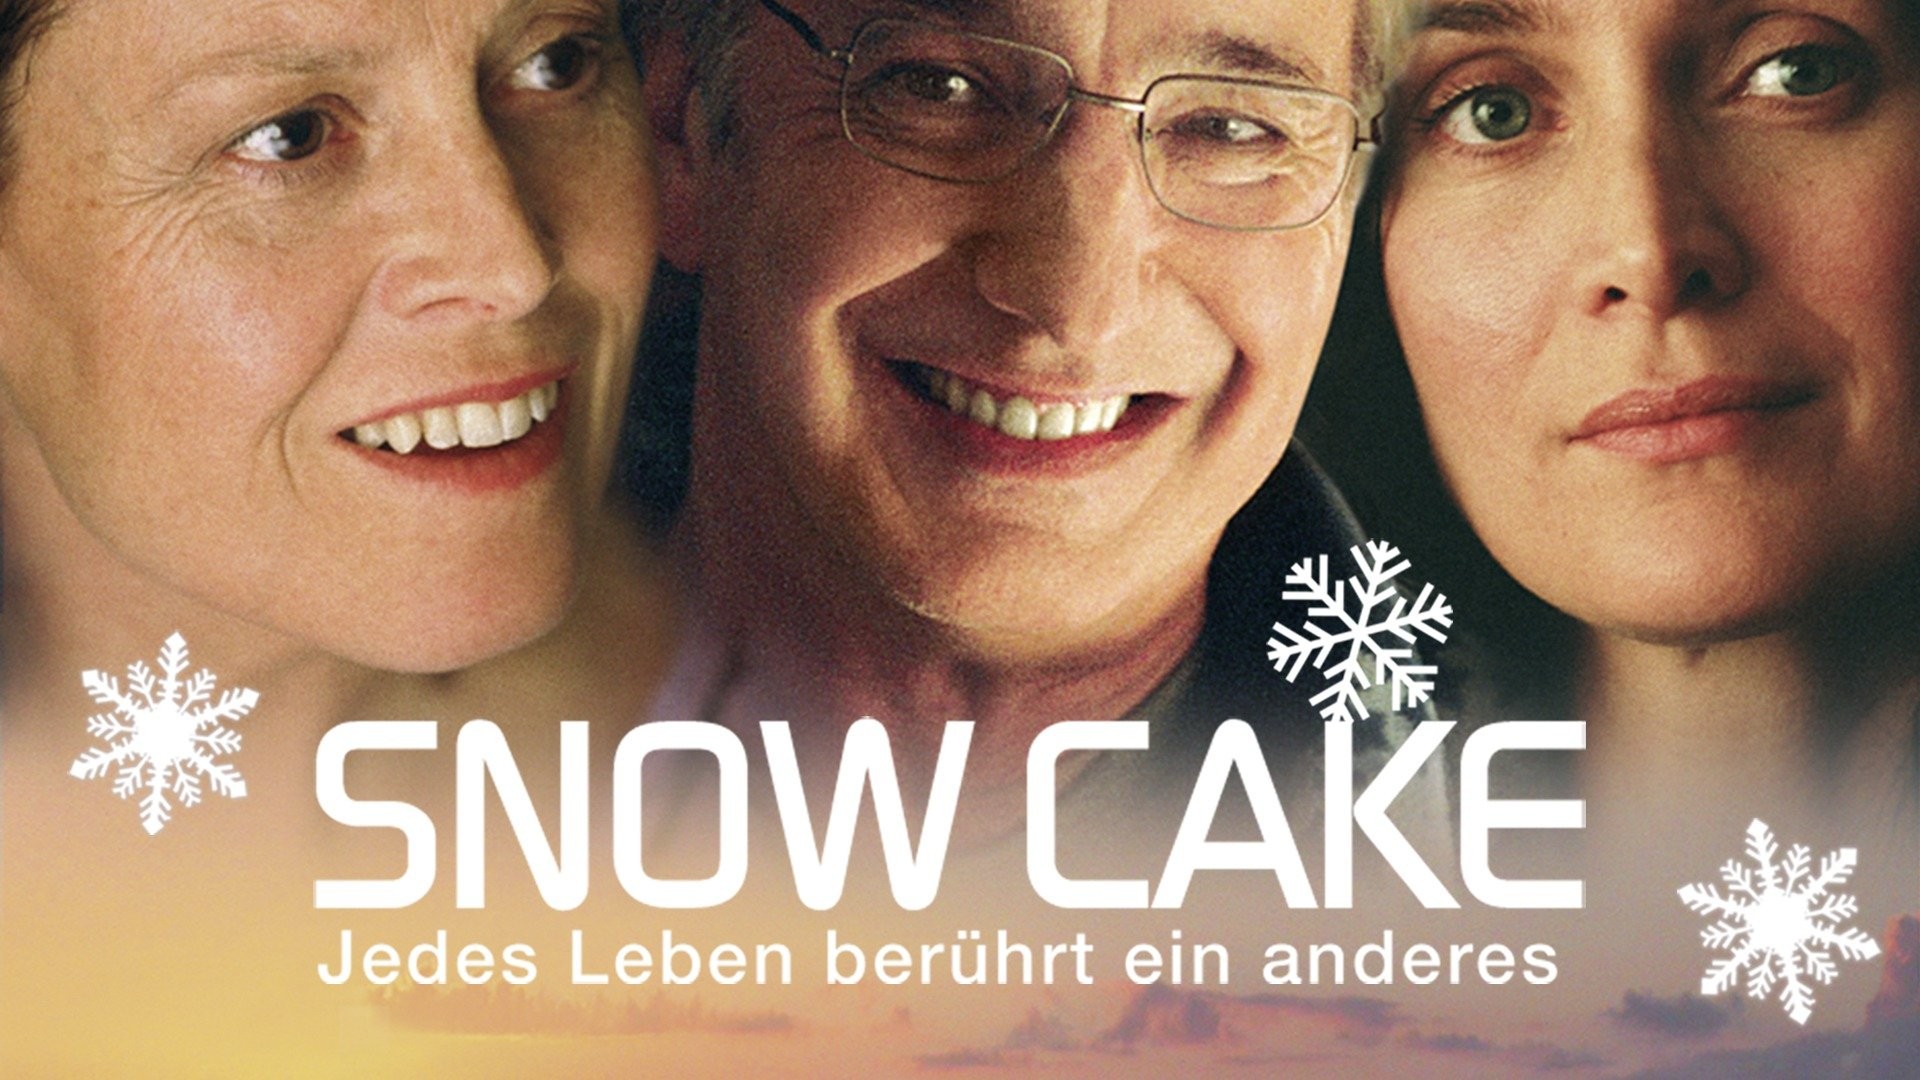 Snow Cake - Trailer en streaming direct et replay sur CANAL+ | myCANAL  Suisse